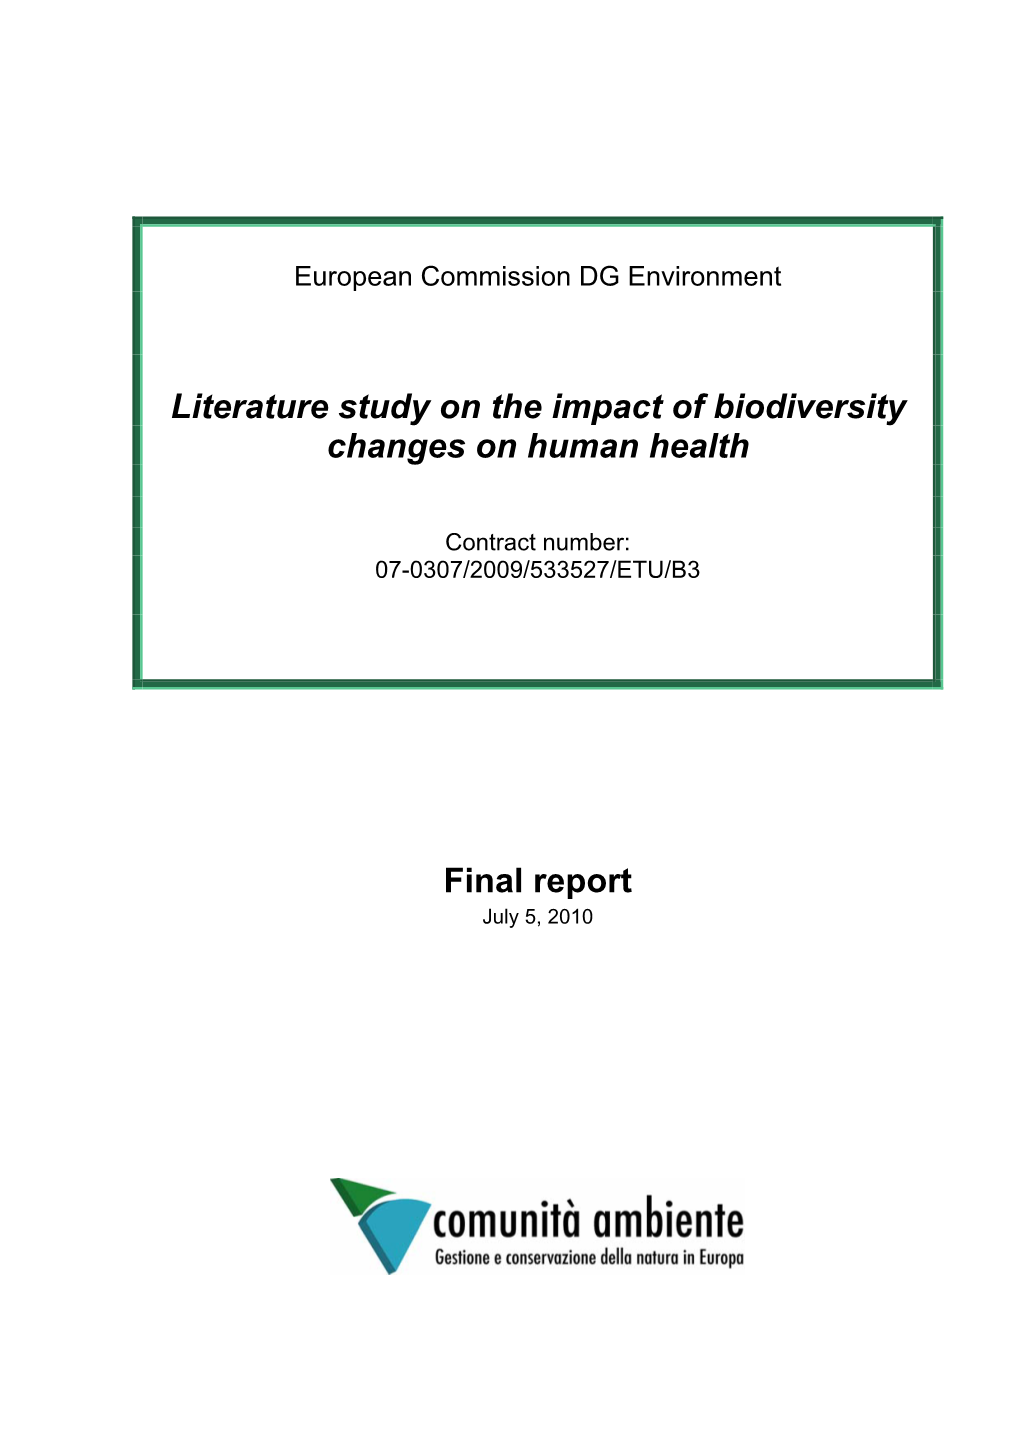 Literature Study on Impacts of Biodiversity Changes on Human Health